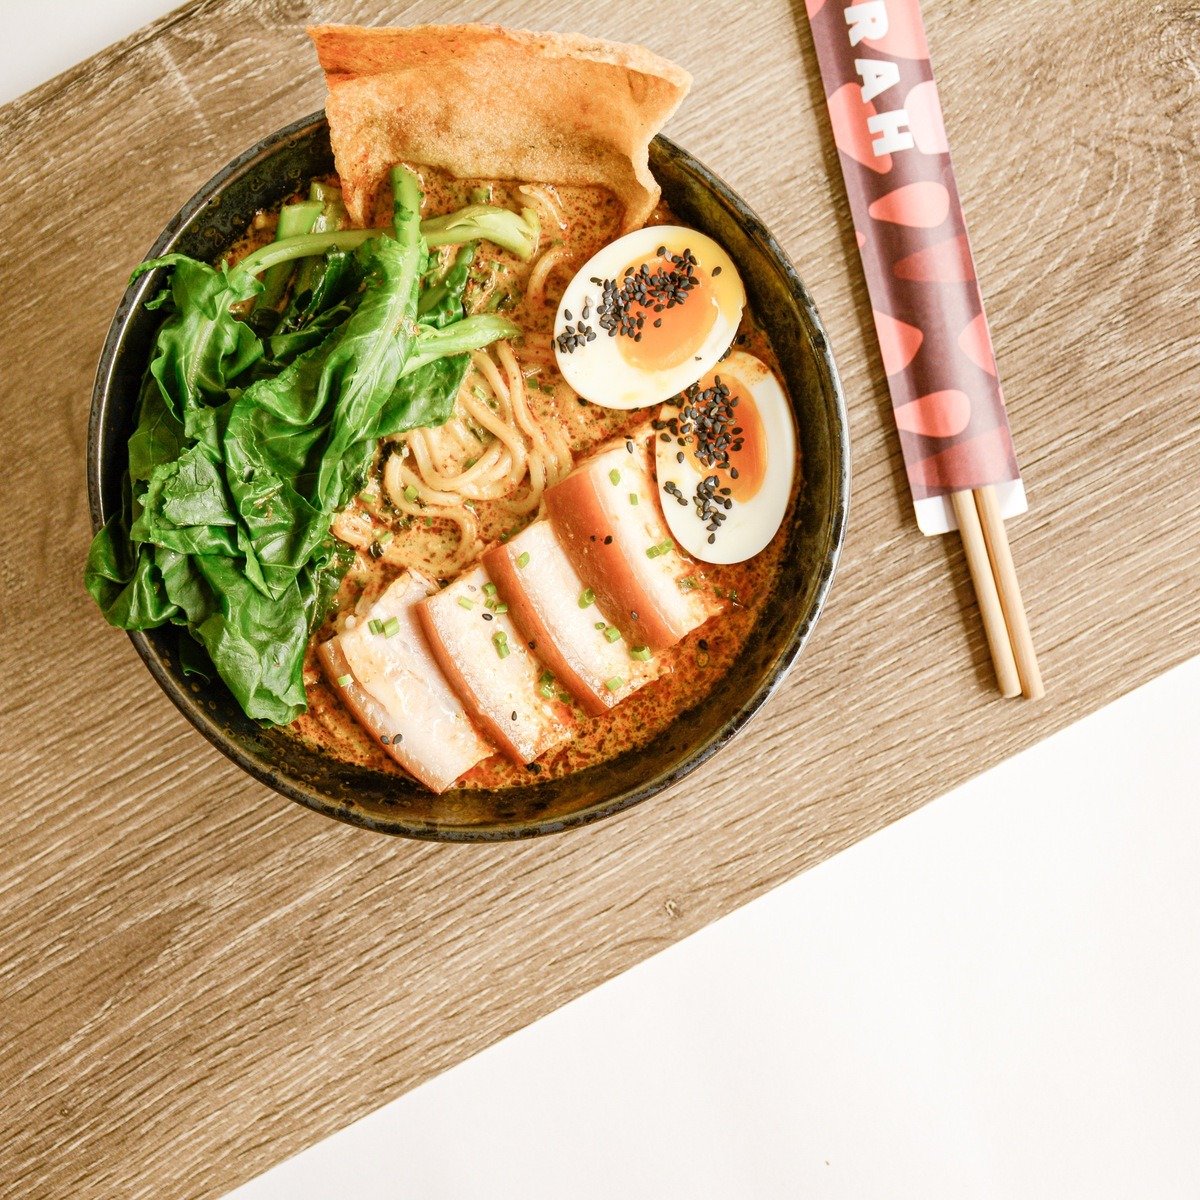 Dive into our Braised Pork Laksa at Restaurant Merah! Featuring ramen-style noodles and our signature creamy curry laksa broth, this dish is pure comfort in a bowl. Our pork belly is braised for 24 hours to perfection, making every bite melt in your 